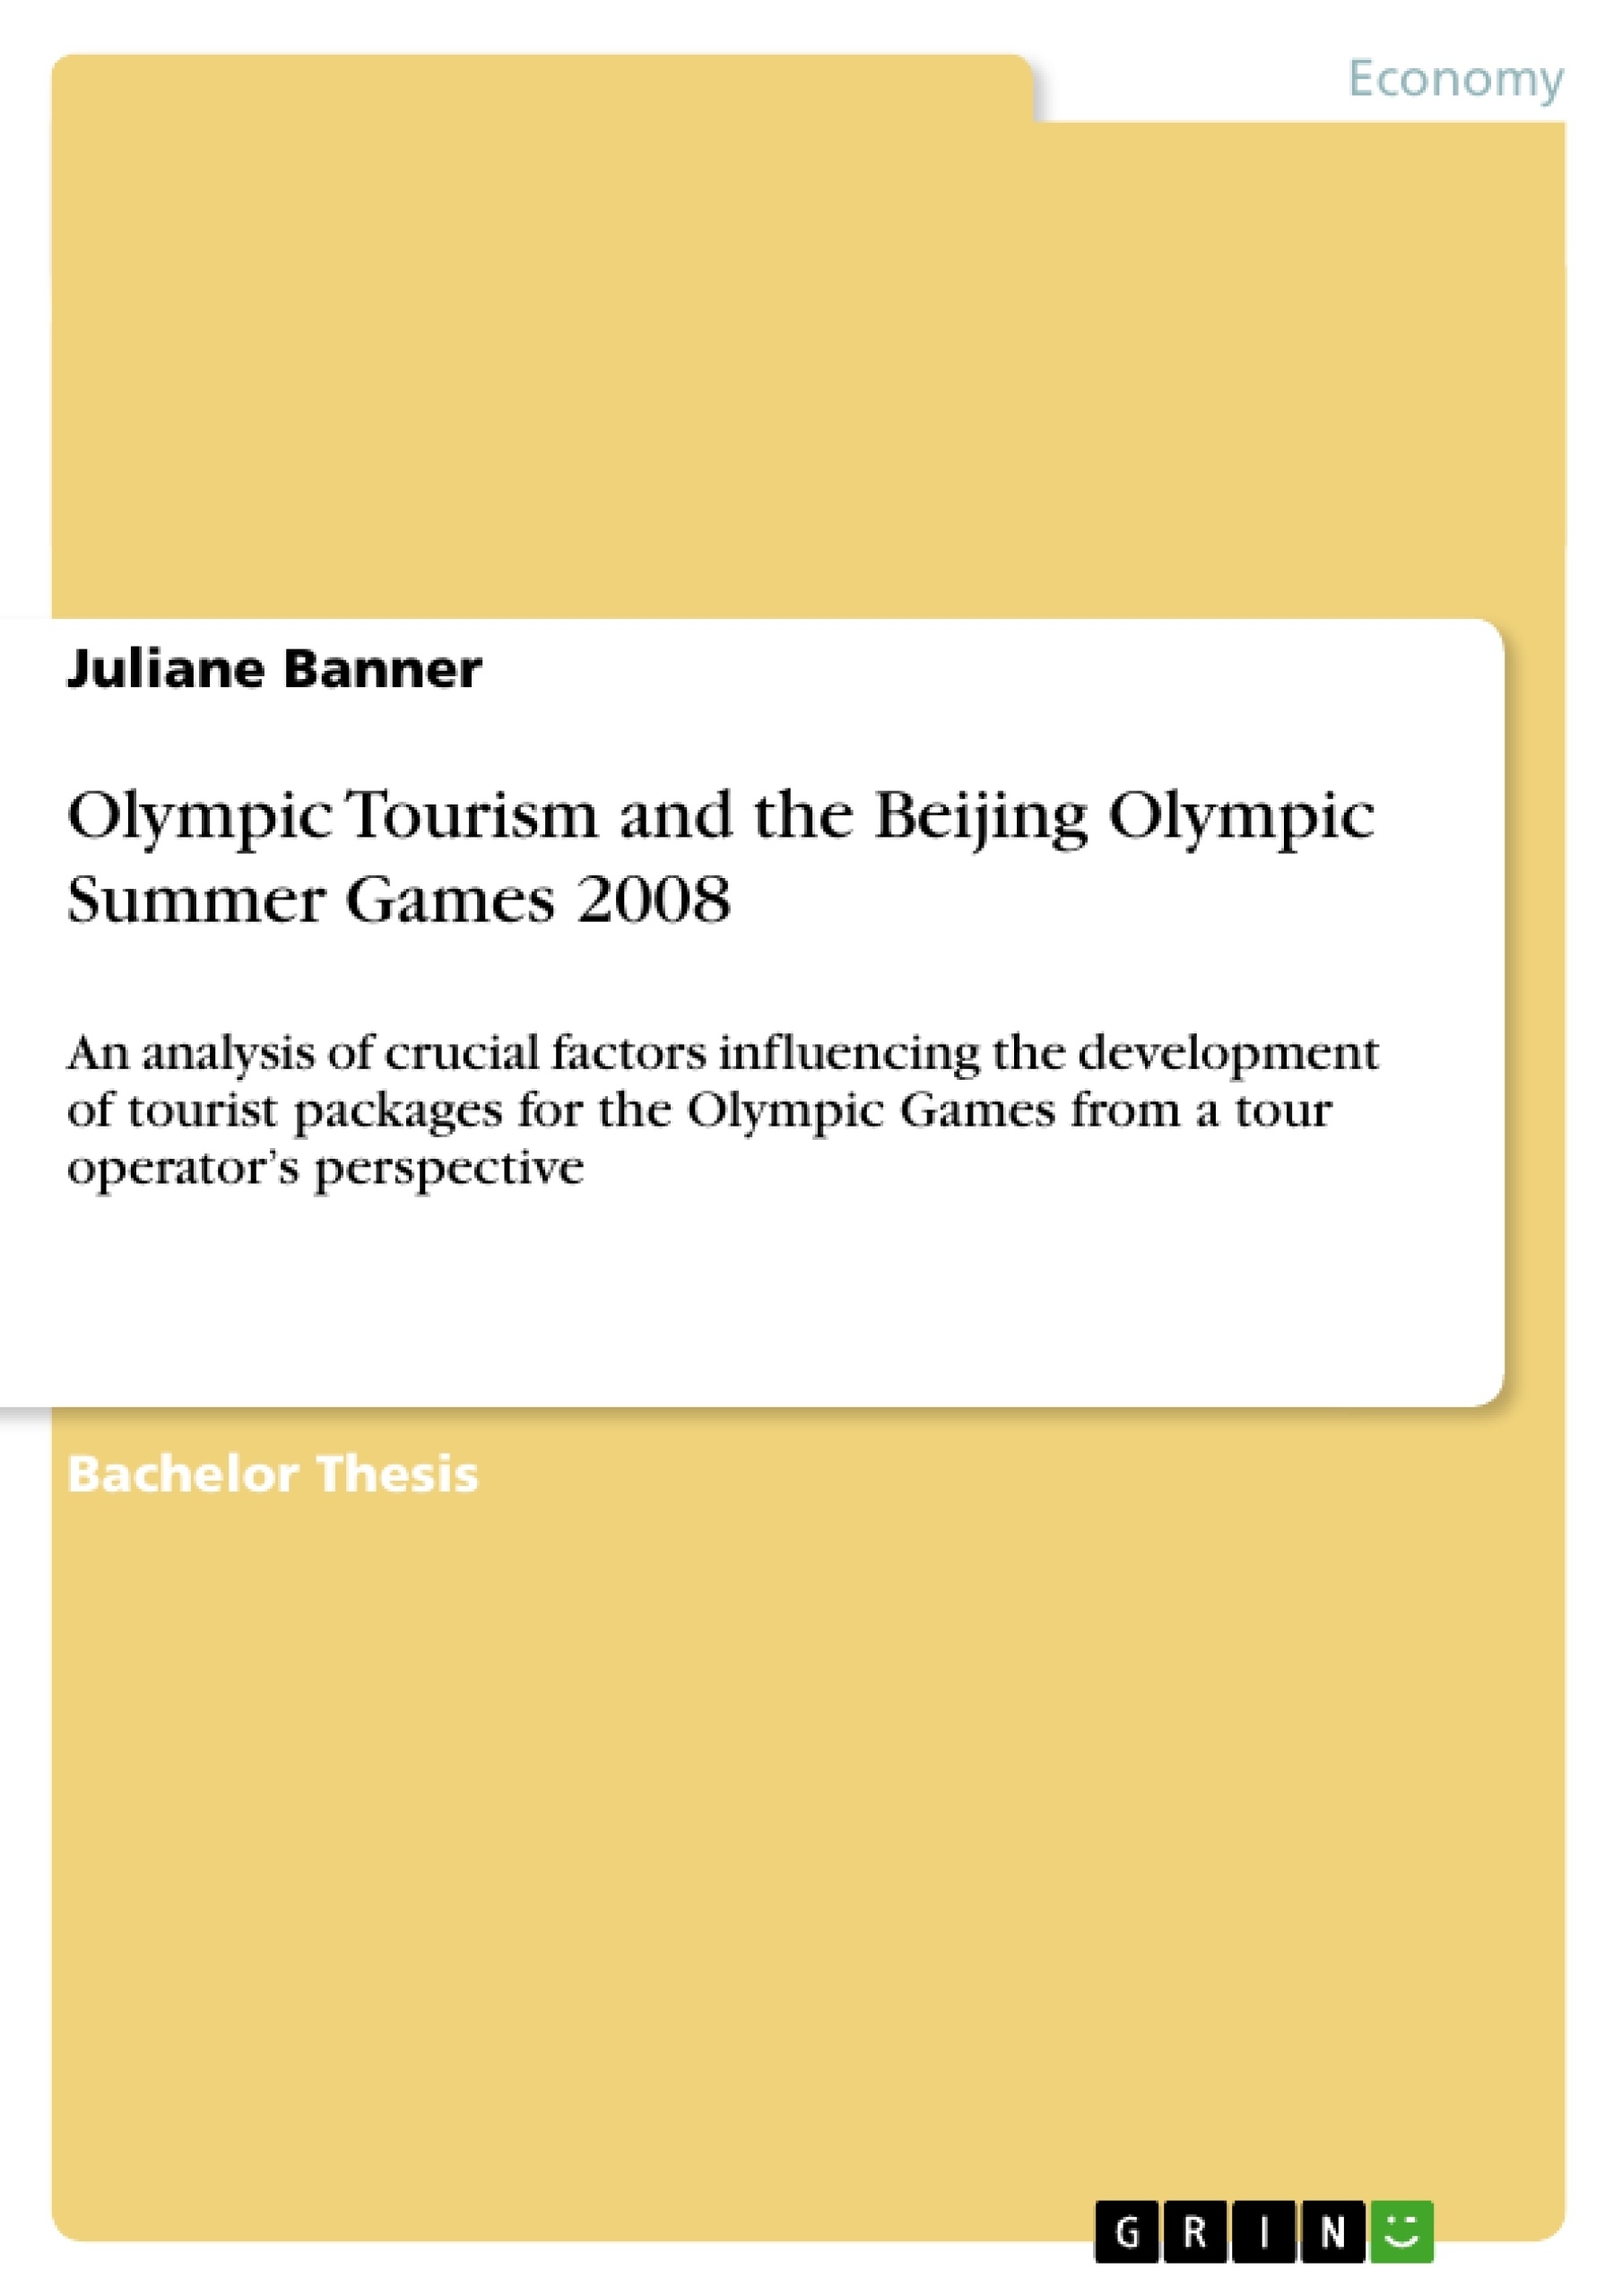 Title: Olympic Tourism and the Beijing Olympic Summer Games 2008